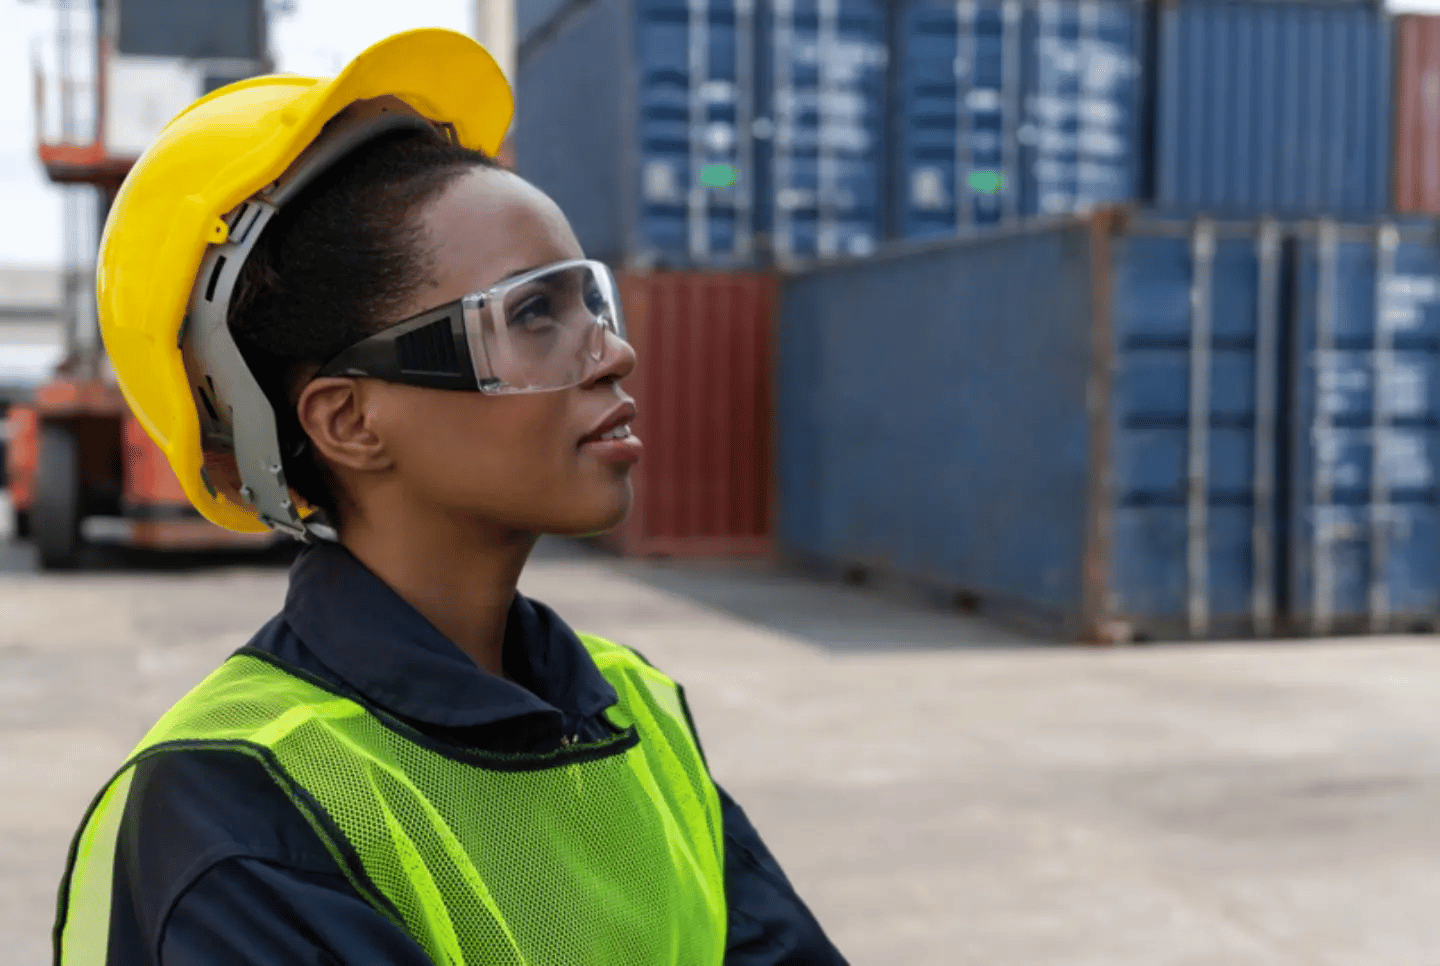 Supply chain professional standing in shipyard with hardhat and goggles. Women comprise 41% of the supply chain workforce in 2021.